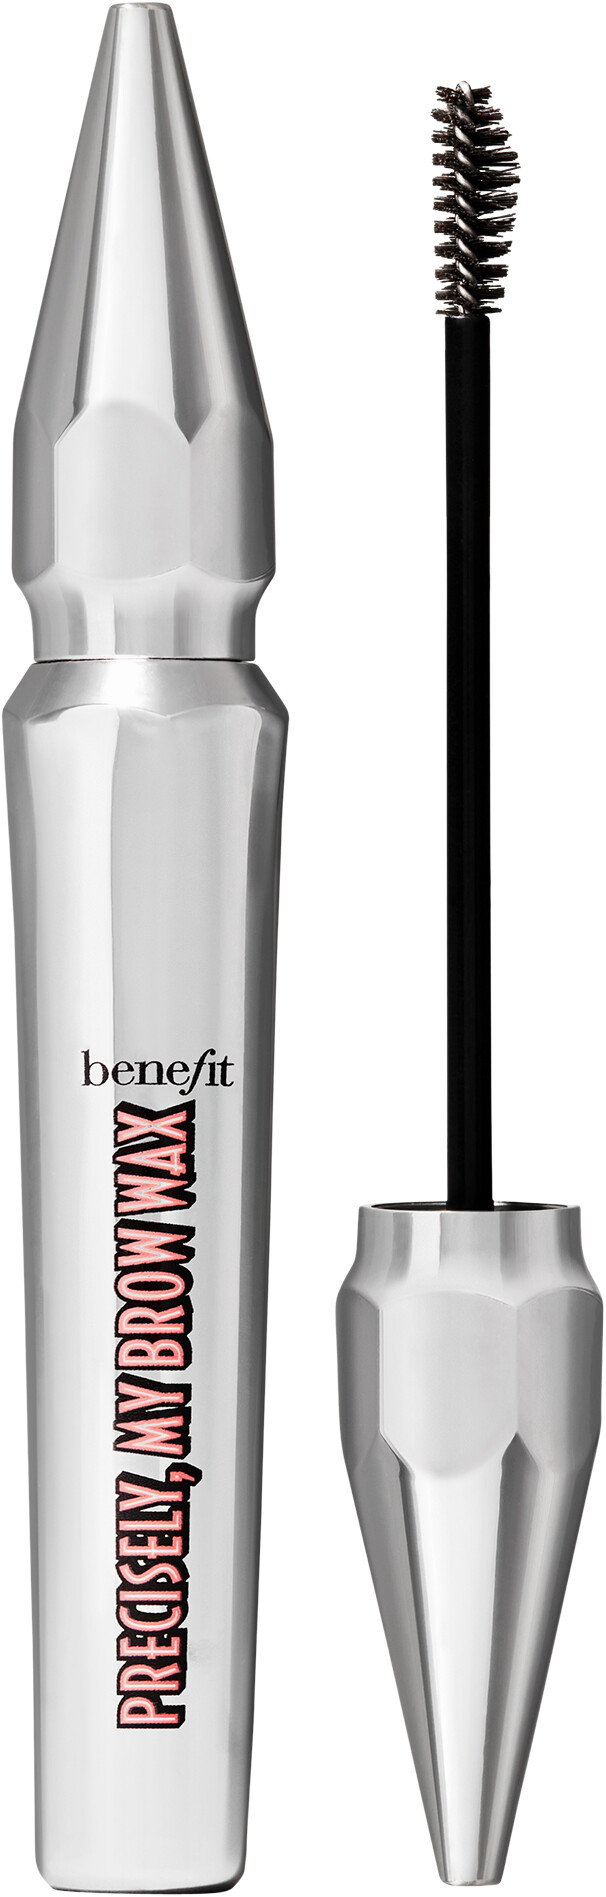 Benefit Precisely, My Brow Wax Full-Pigment Sculpting Brow Wax 5g Grey